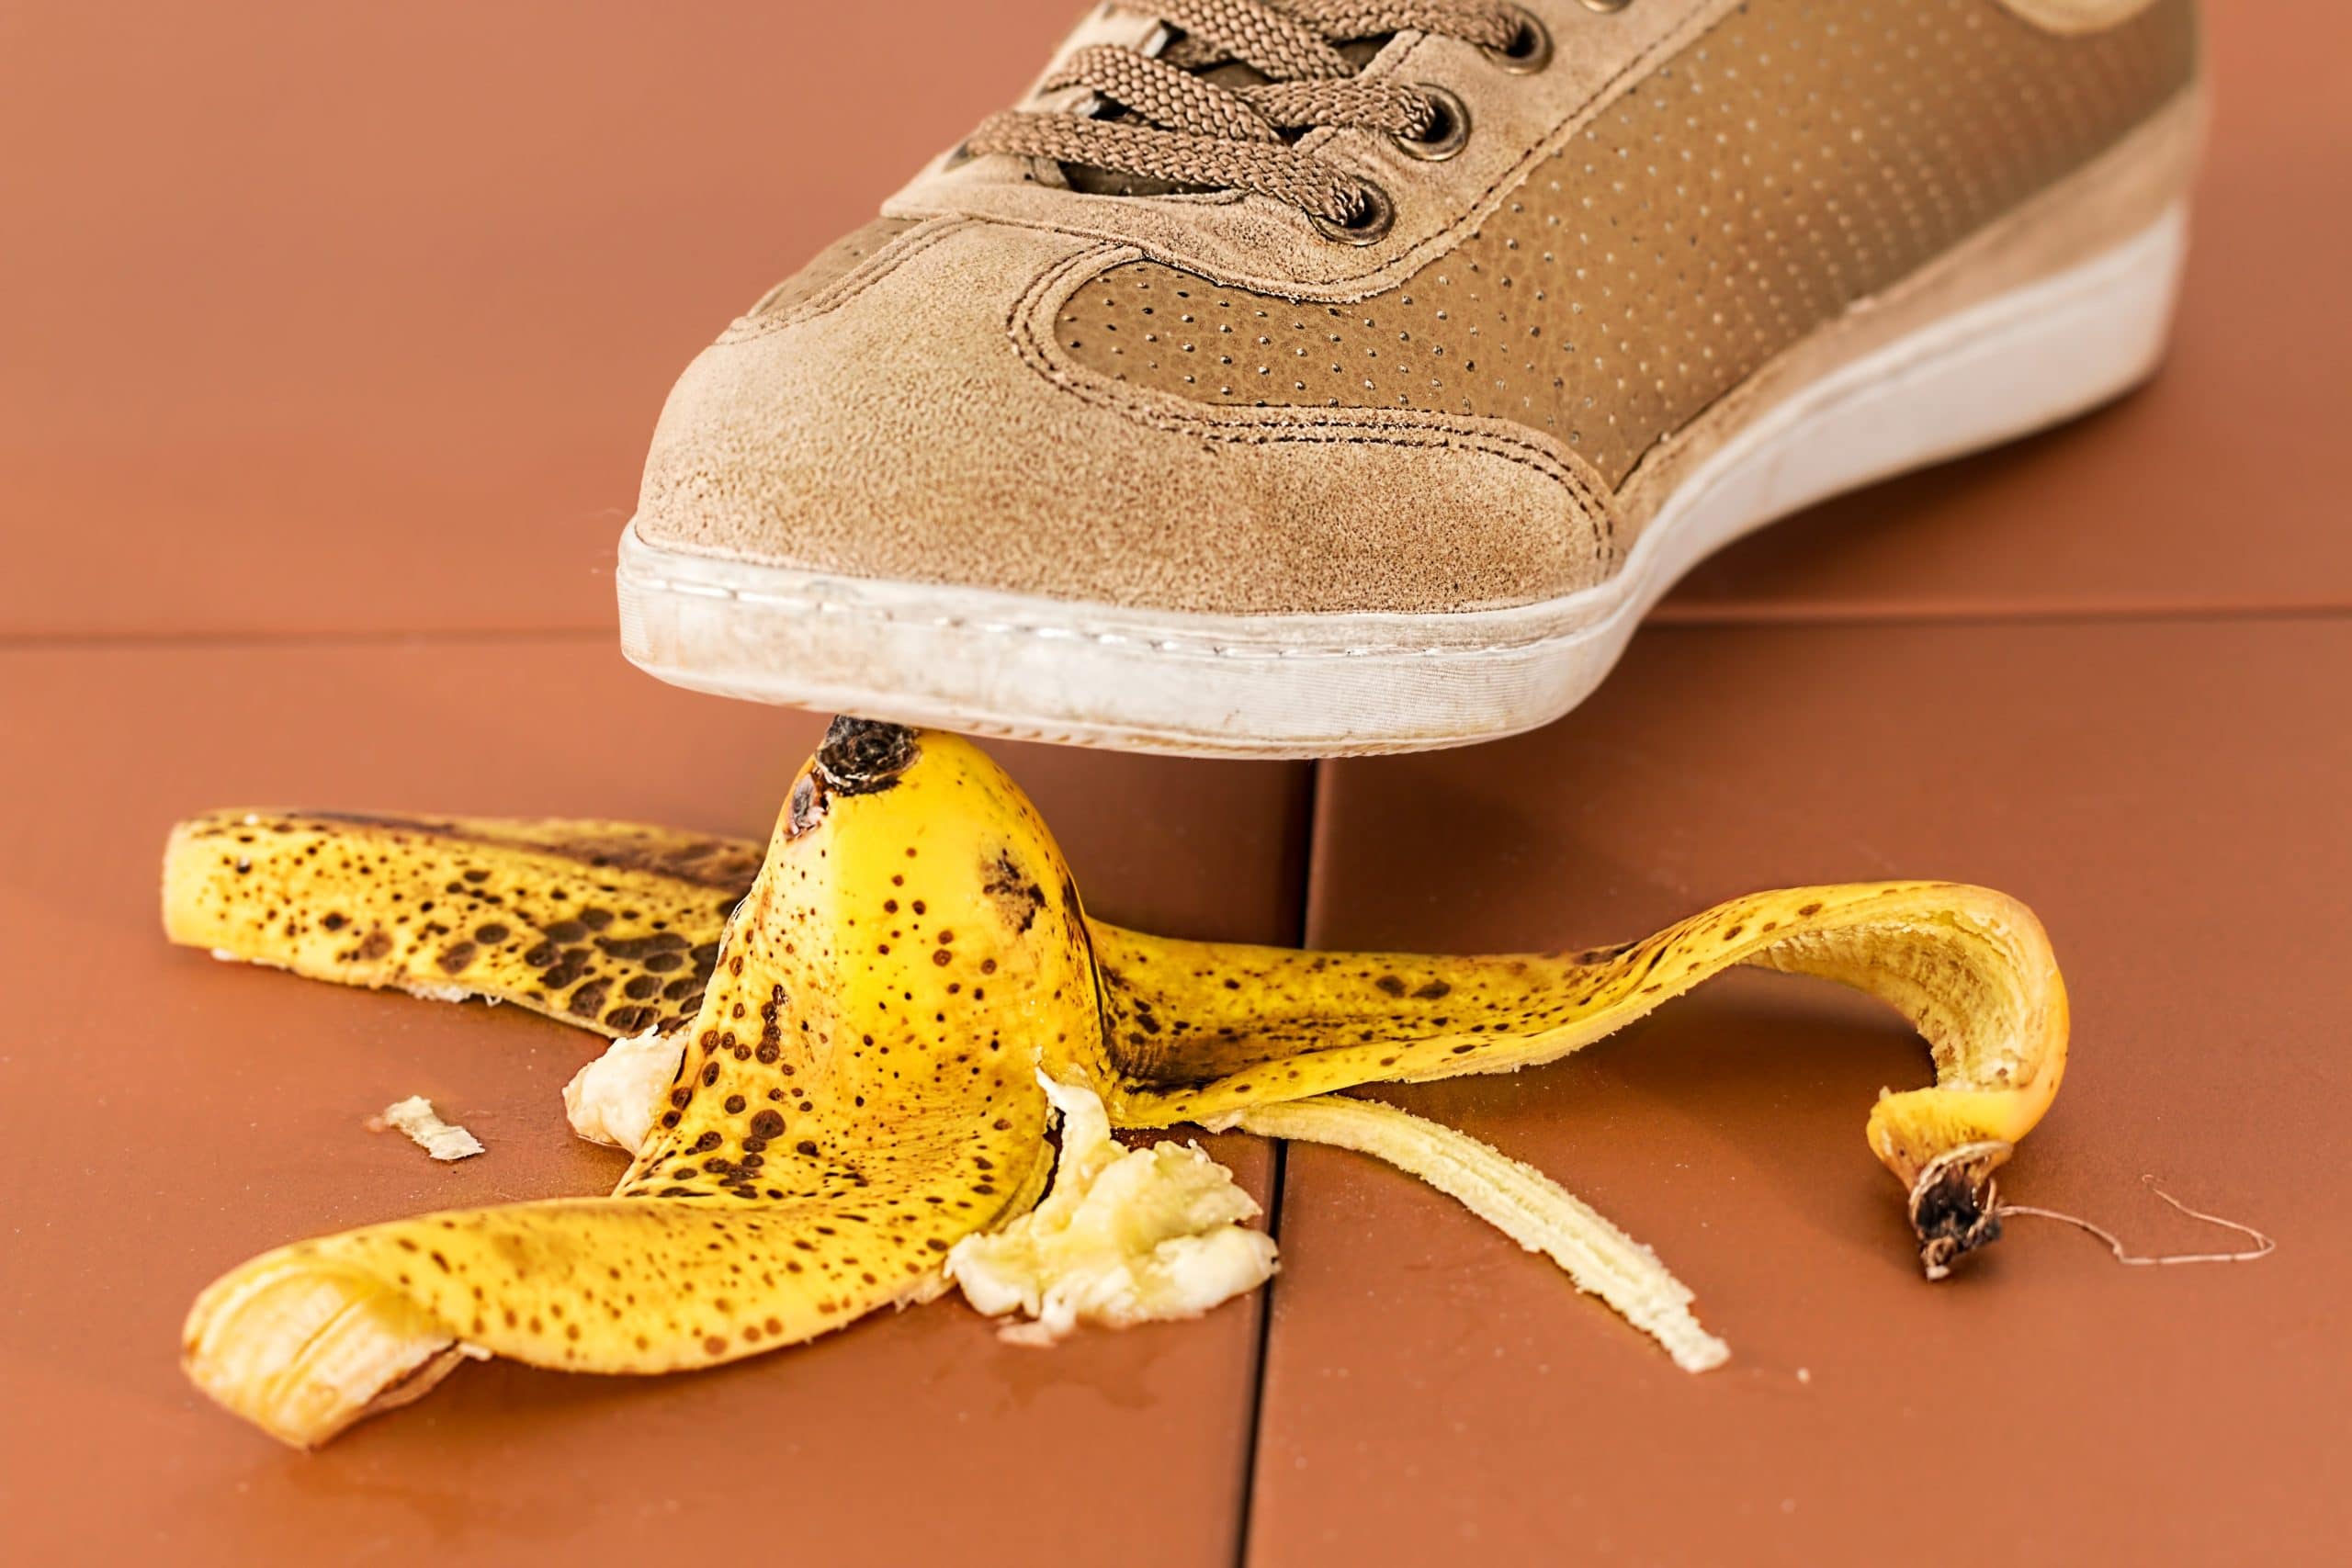 Photo of a shoe about to slip on a banana peel, implying there is going to be a slip and fall accident shortly